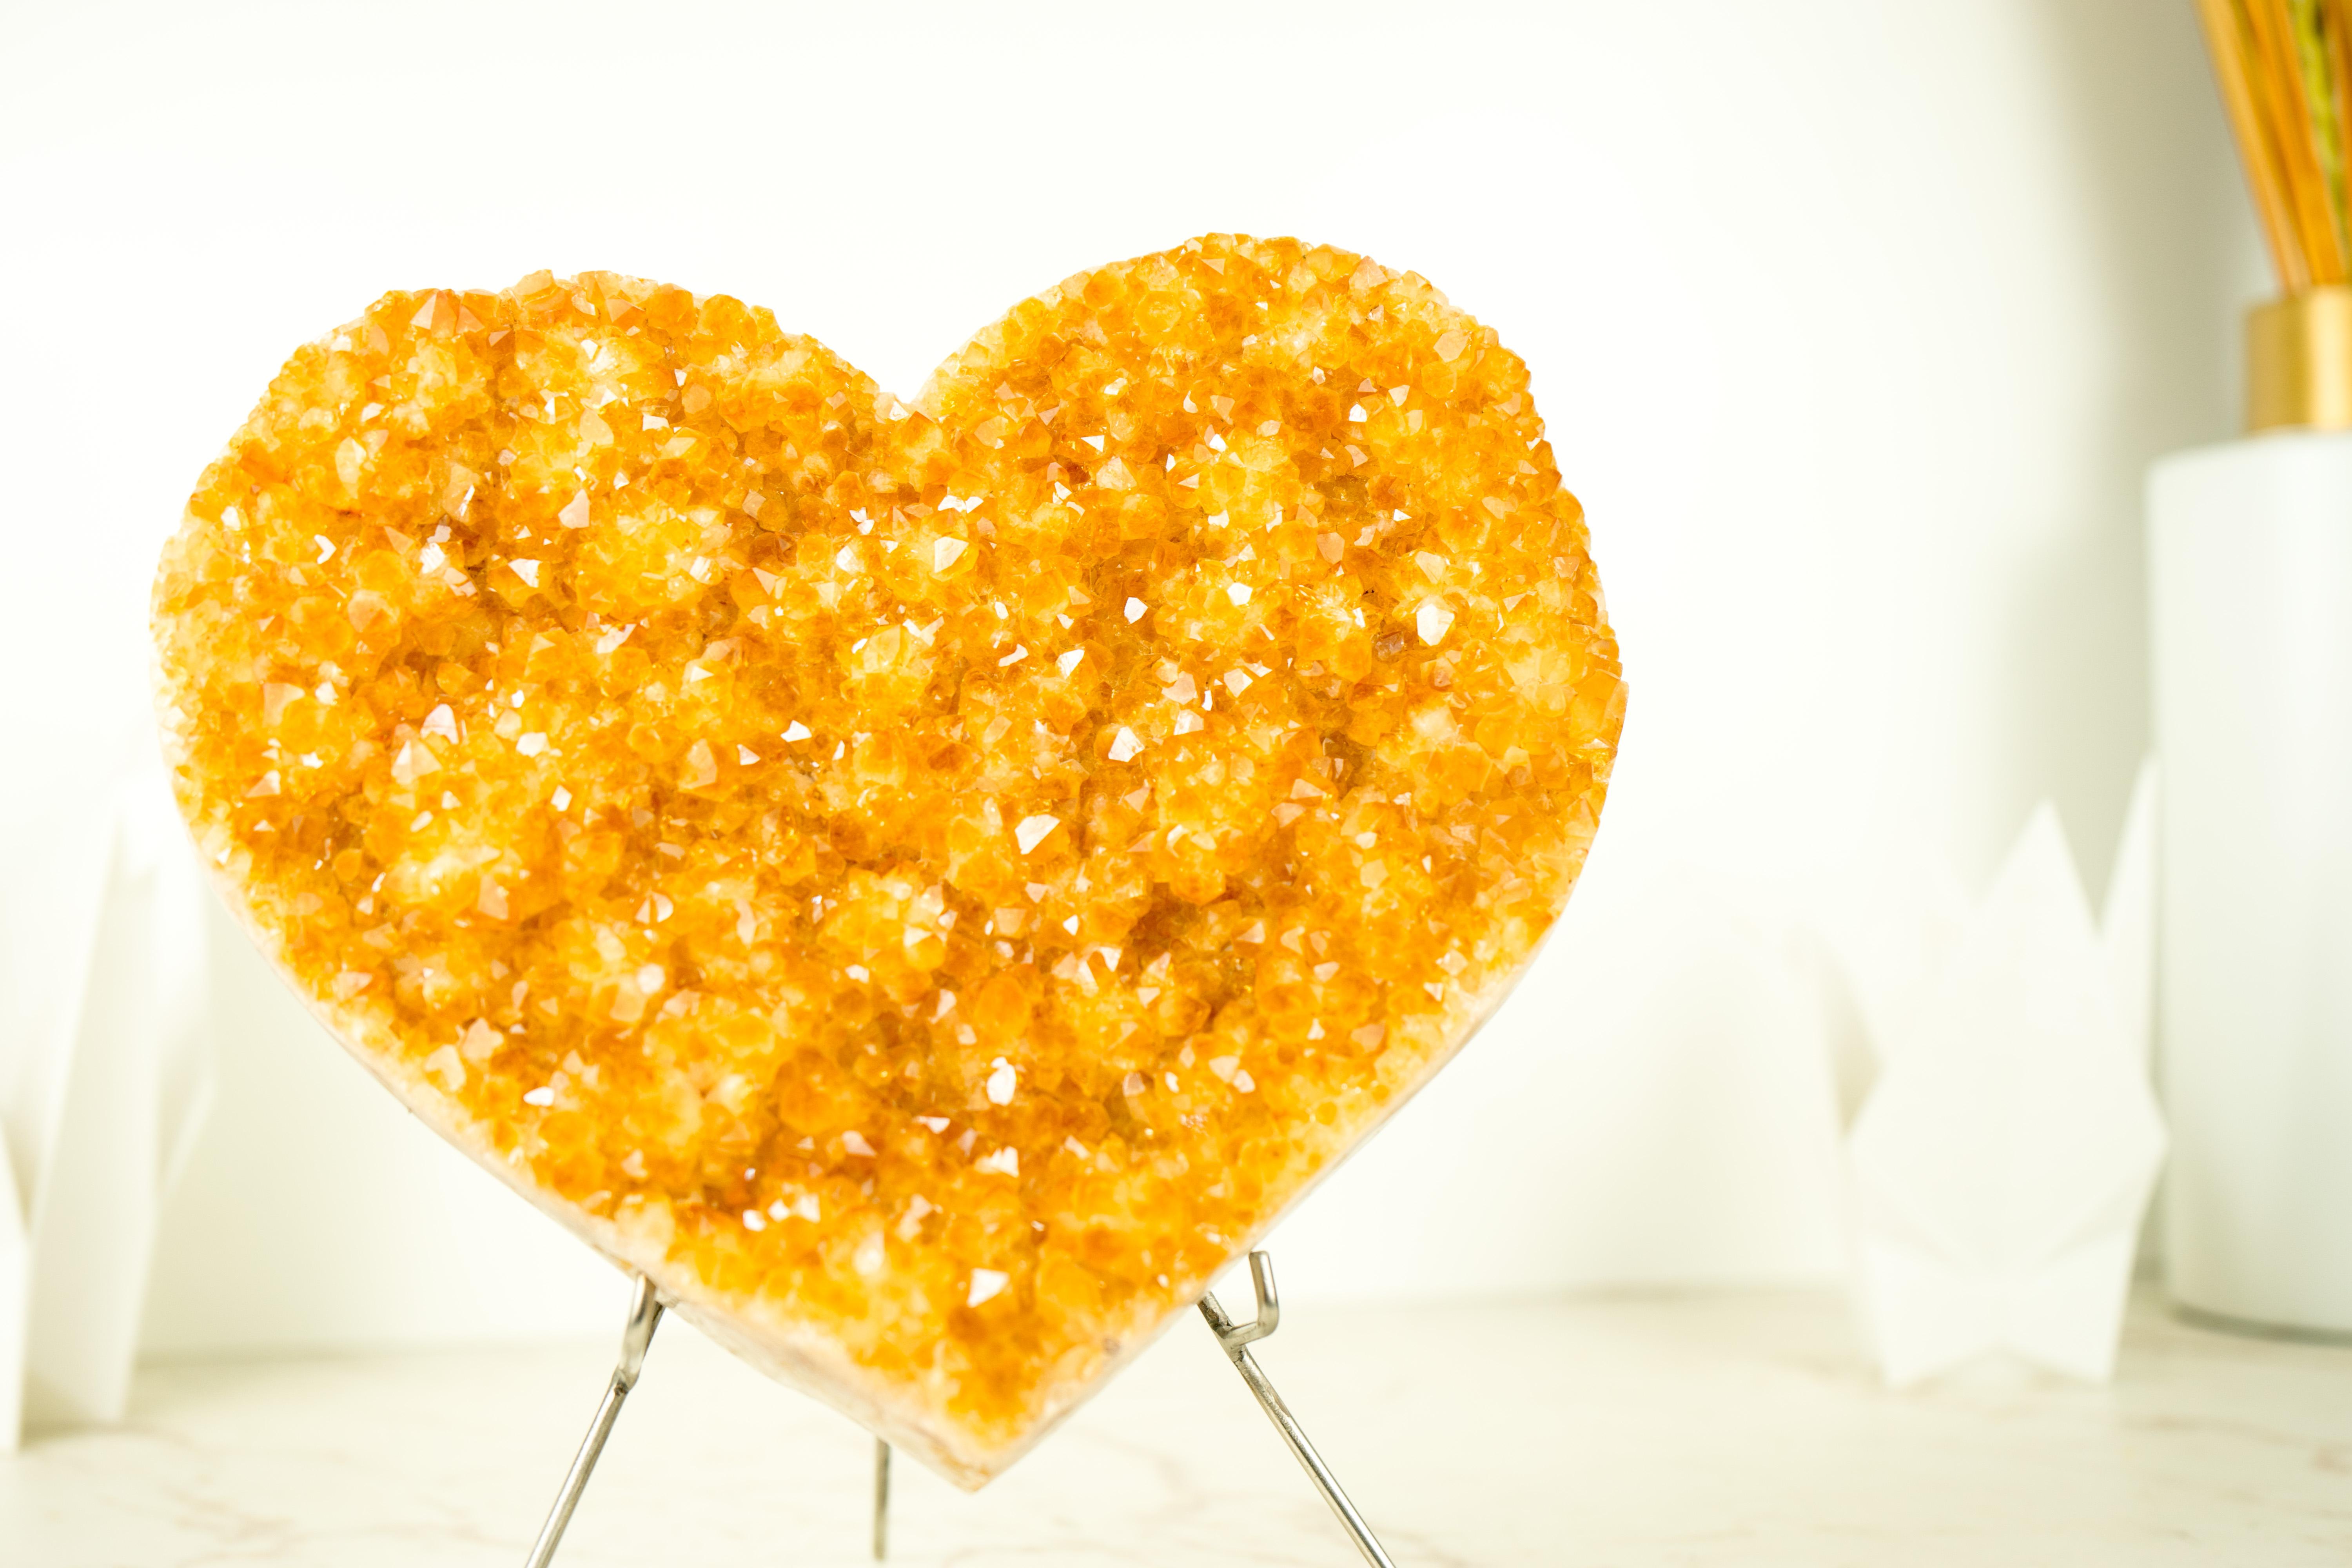 Large Citrine Heart with Shiny Golden Orange Citrine Druzy

▫️ Description

Hand-carved from a single Citrine cluster, this Golden Orange Citrine Heart showcases wonderful aesthetics with its sparkly Druzy. It is a Citrine specimen that will become